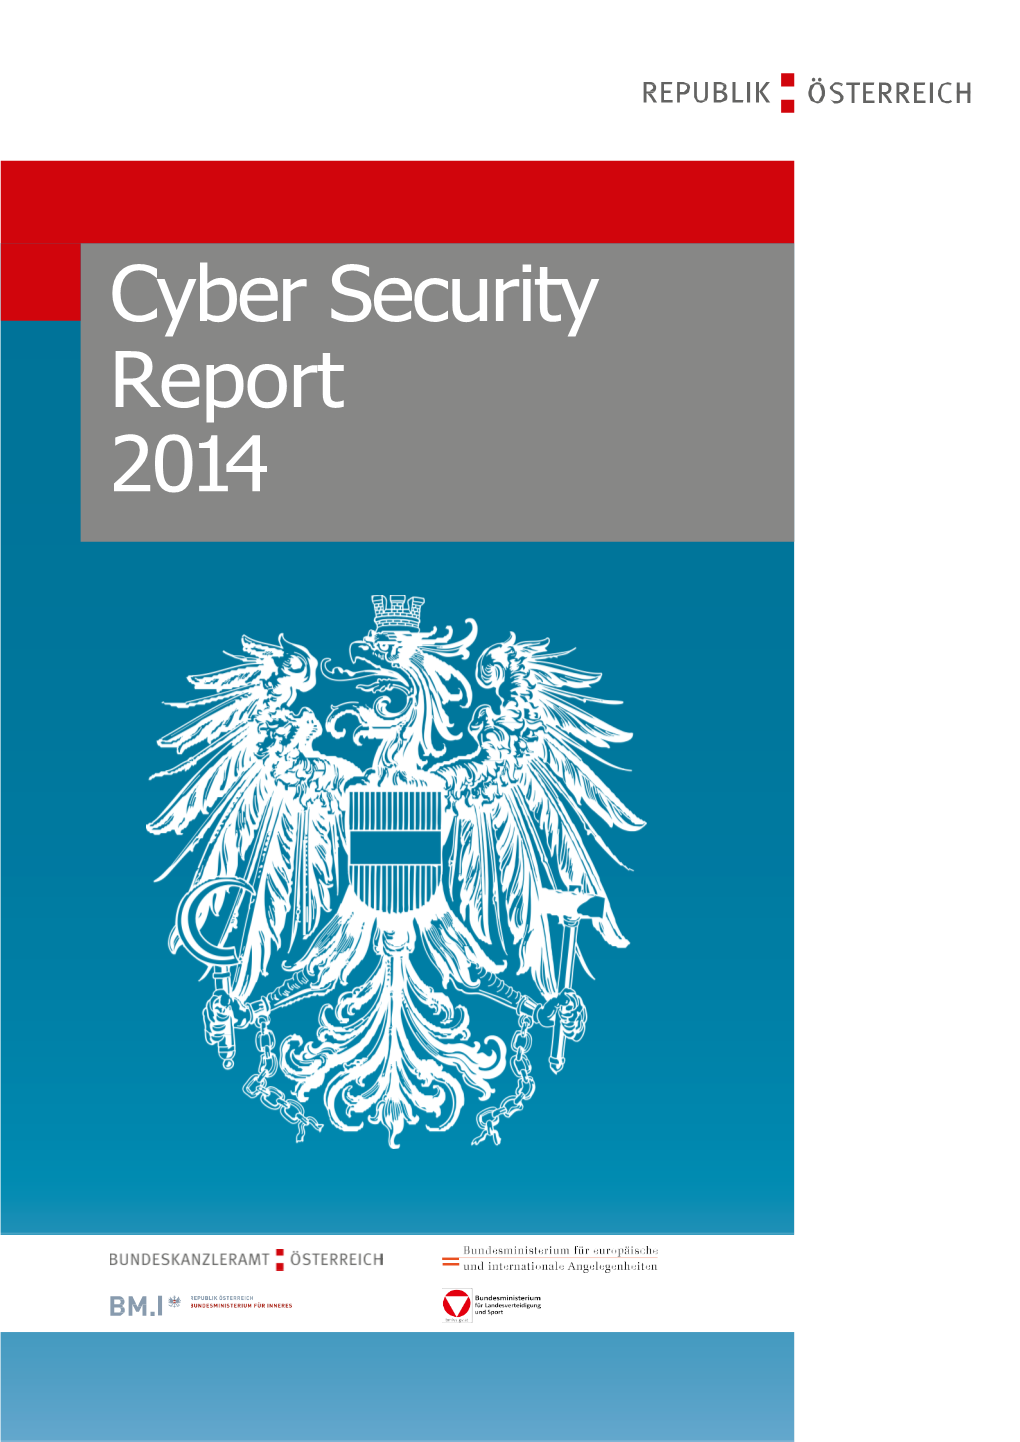 Cyber Security Report 2014